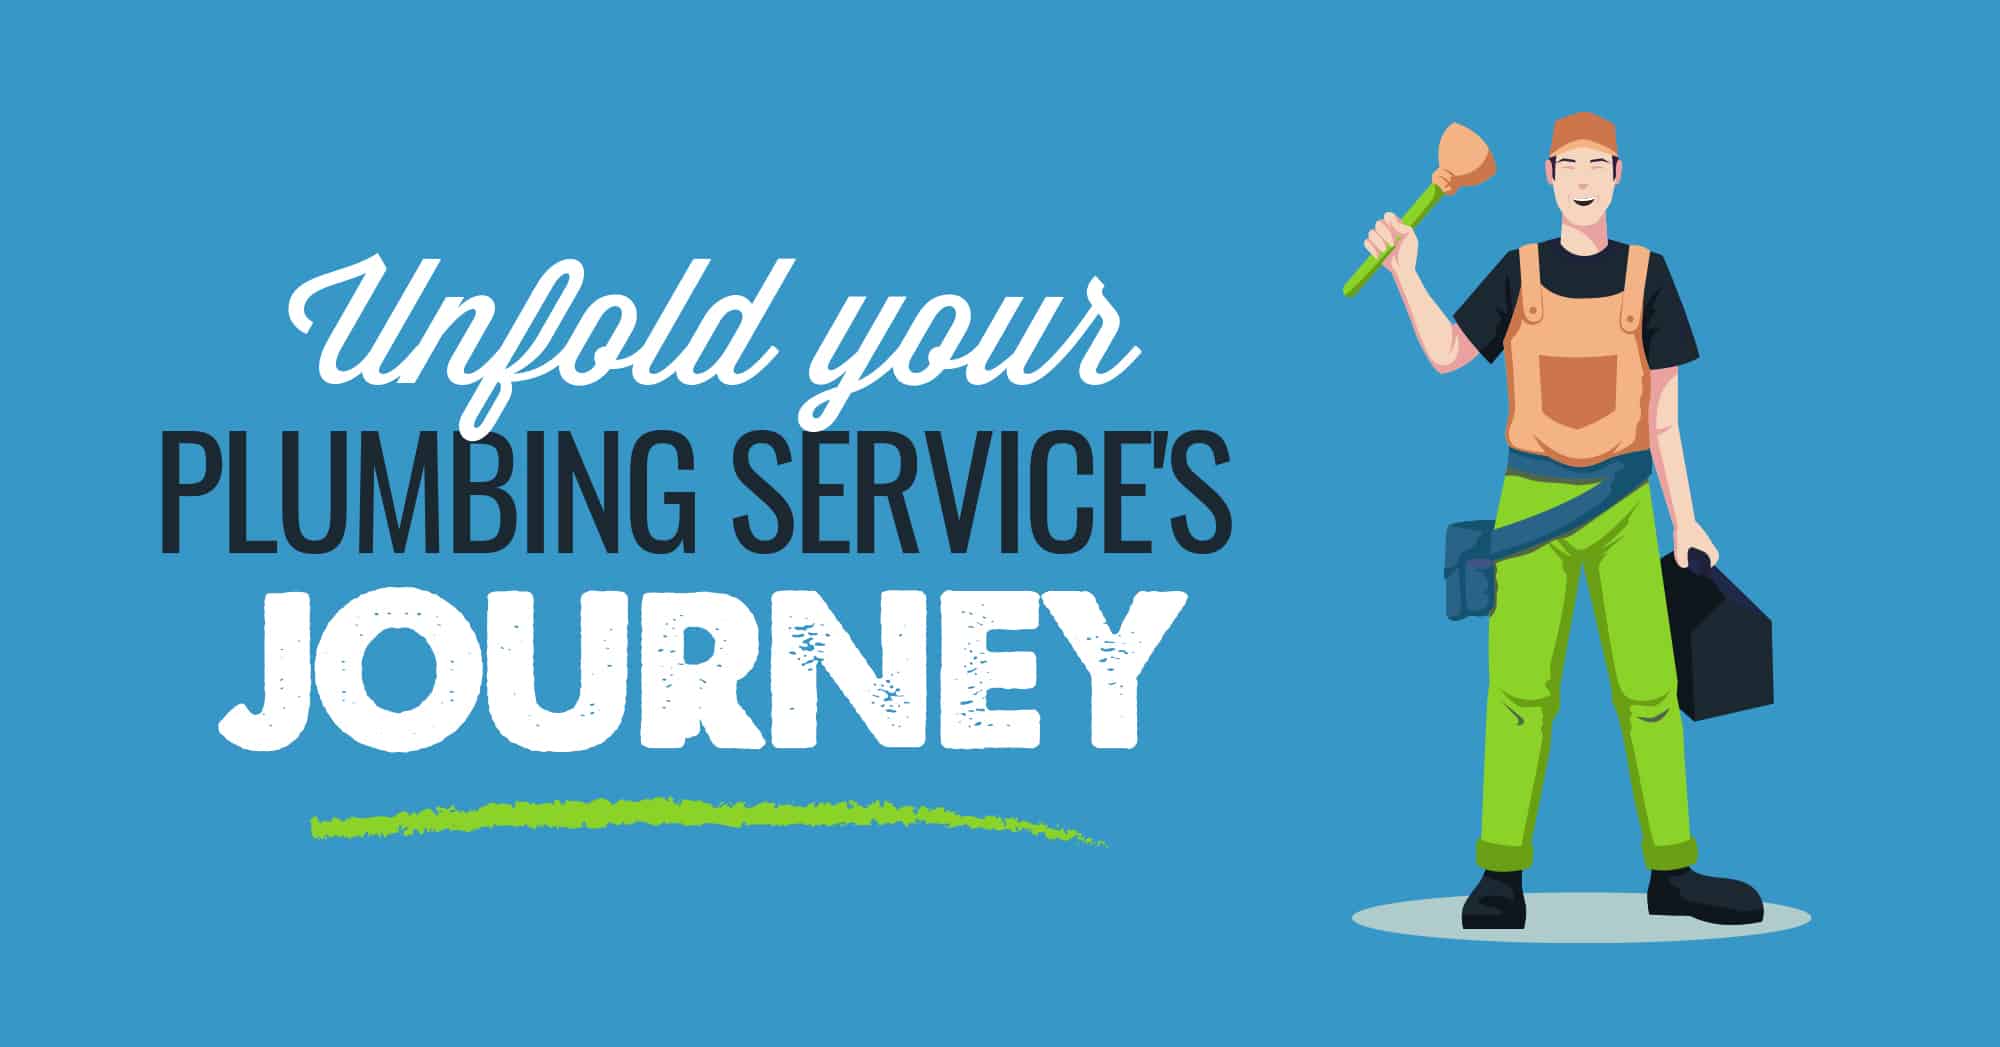 Unfold your plumbing services journey